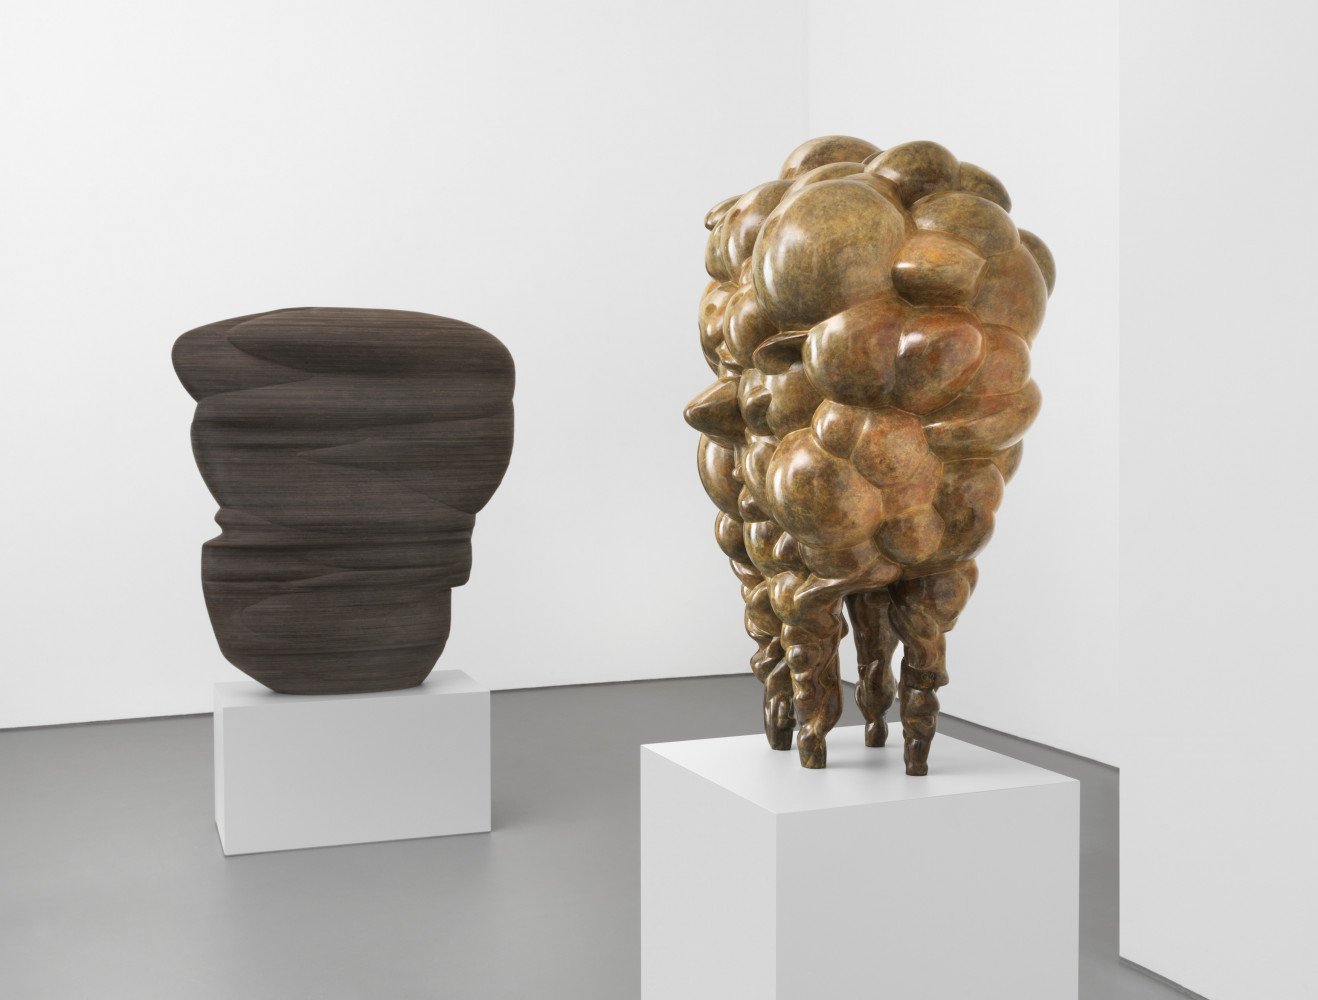 Shop The Show: Tony Cragg's New Sculptures Reimagine the Fundamental  Building Blocks of Nature and the Human Body